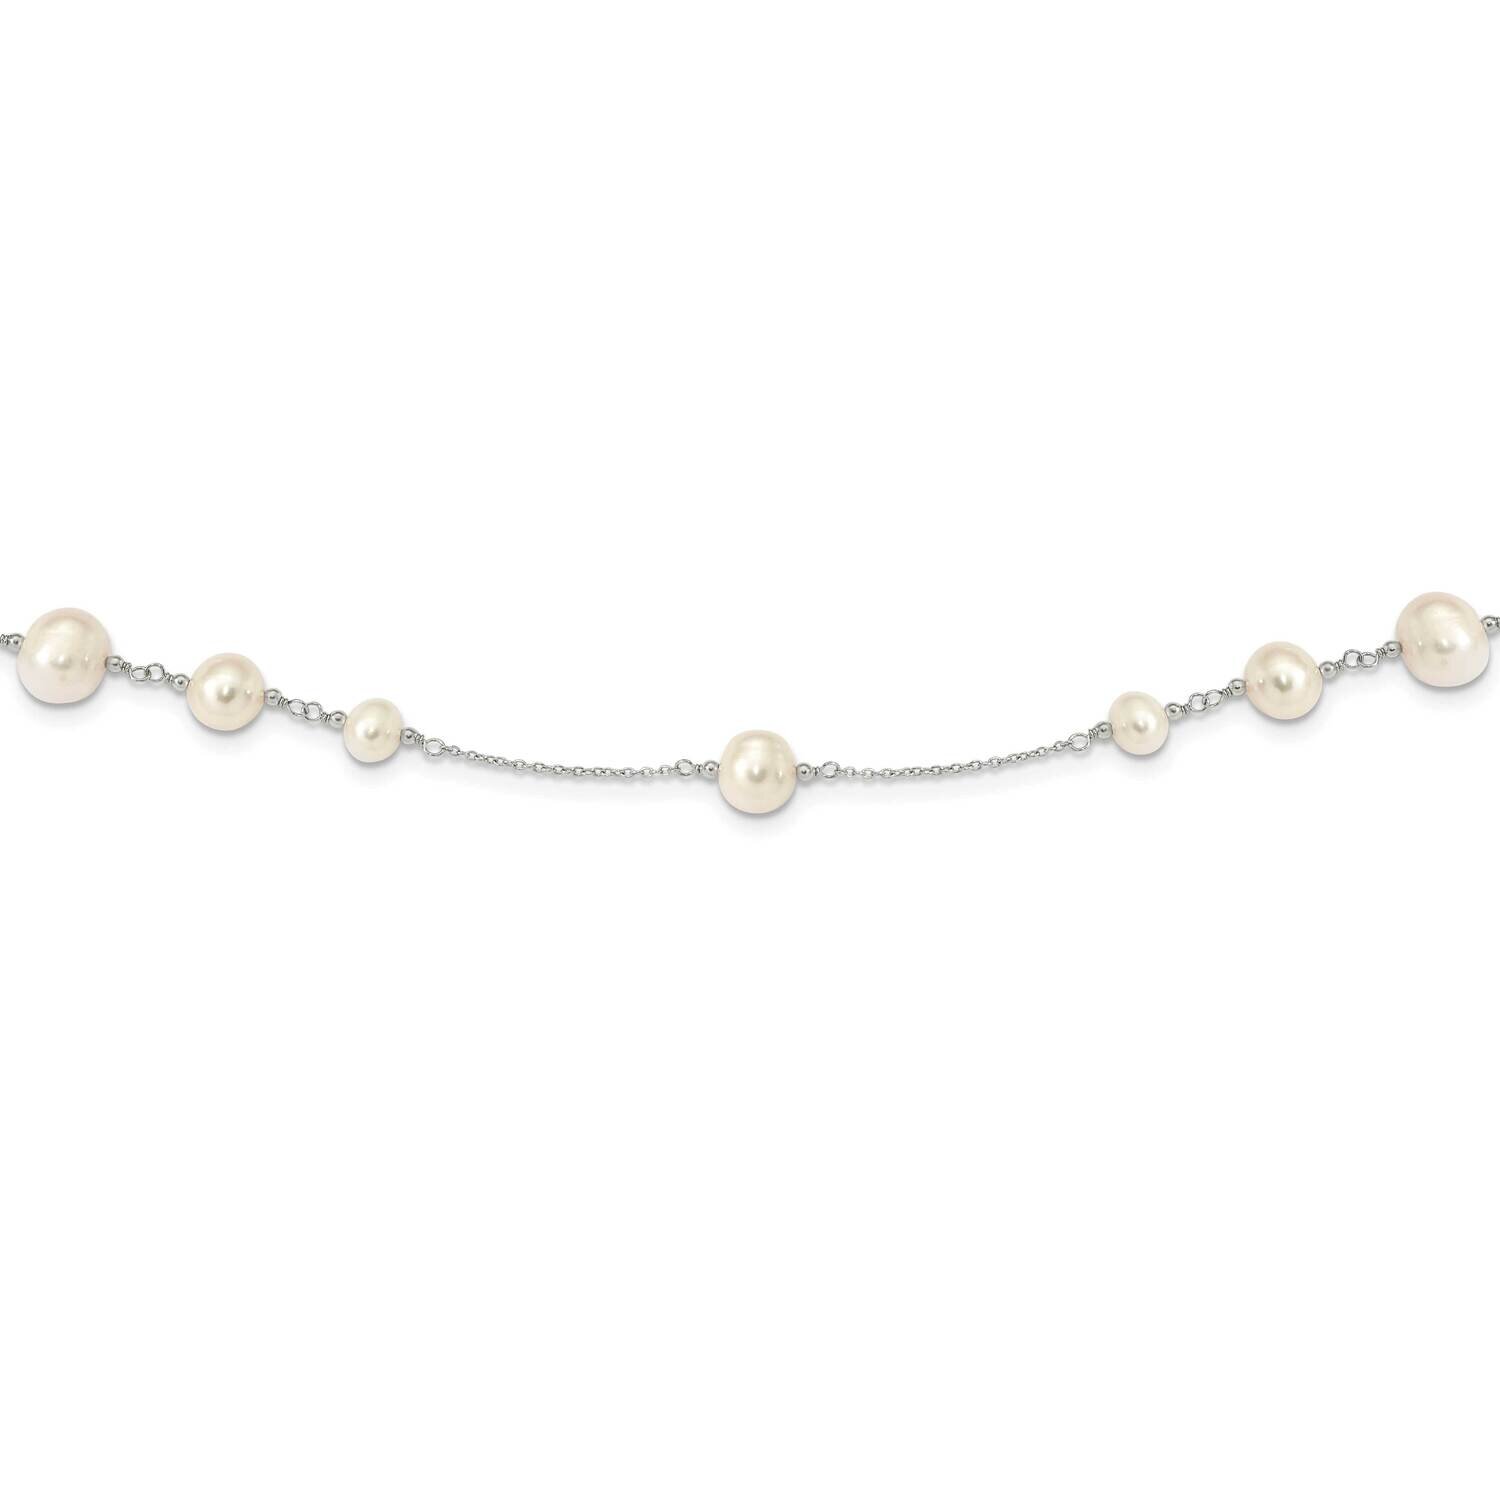 7-10.5mm White Rice Cultured Freshwater Pearl Necklace Sterling Silver Rhodium-plated QH5635-35.5